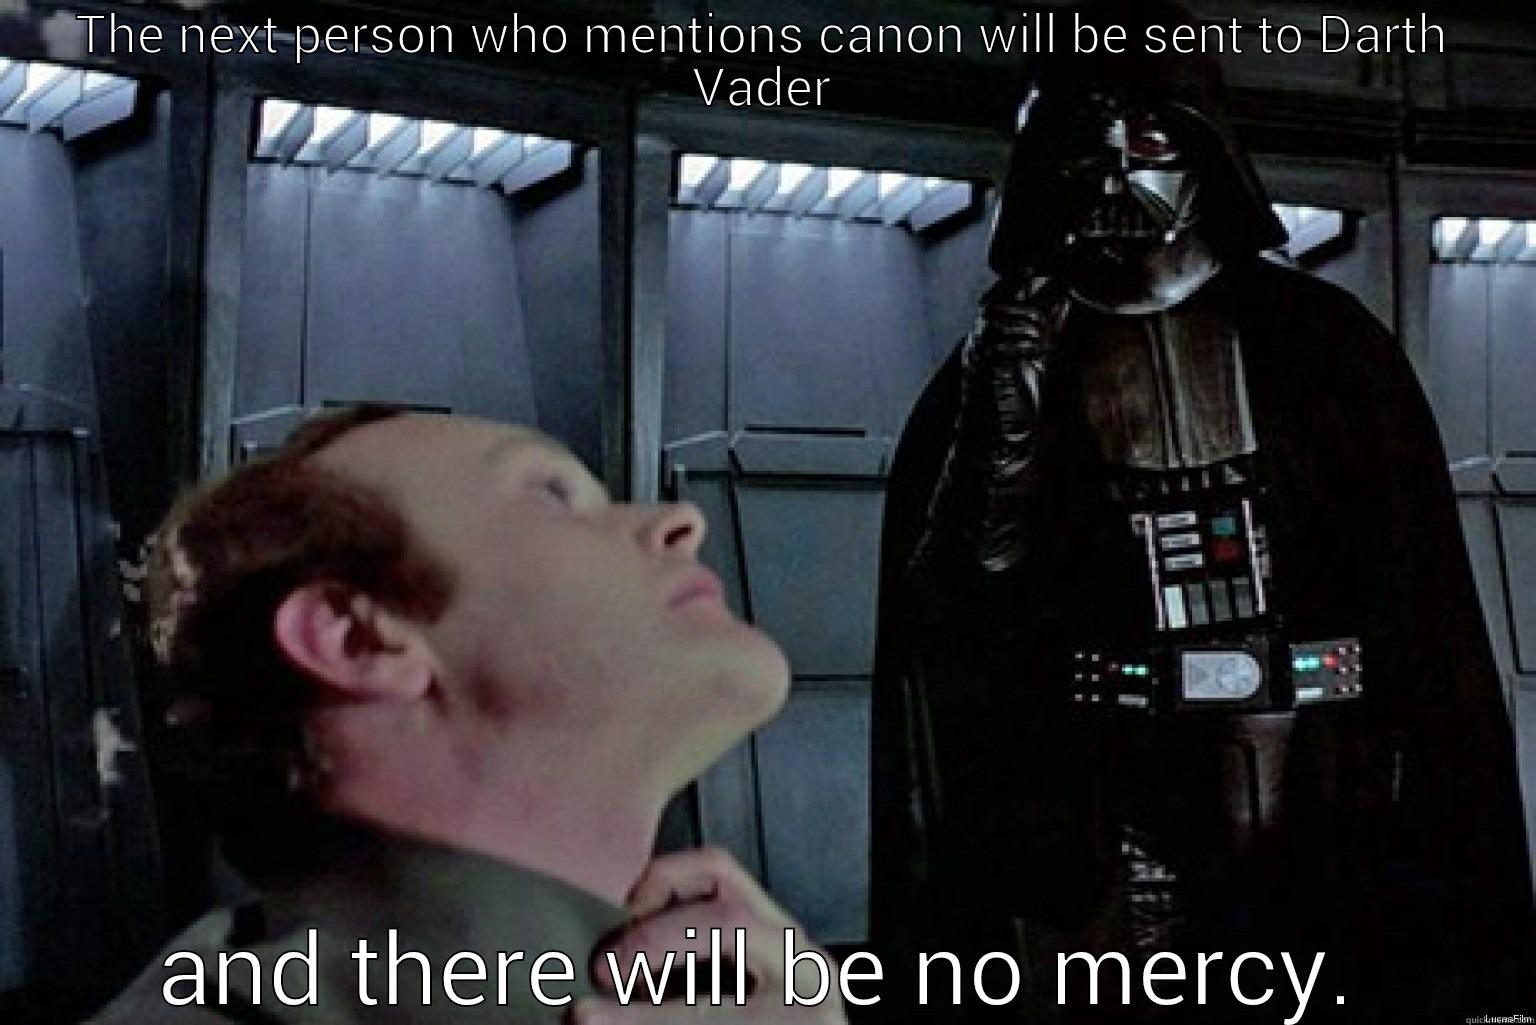 I Hate Canon Nazis - THE NEXT PERSON WHO MENTIONS CANON WILL BE SENT TO DARTH VADER AND THERE WILL BE NO MERCY. Misc